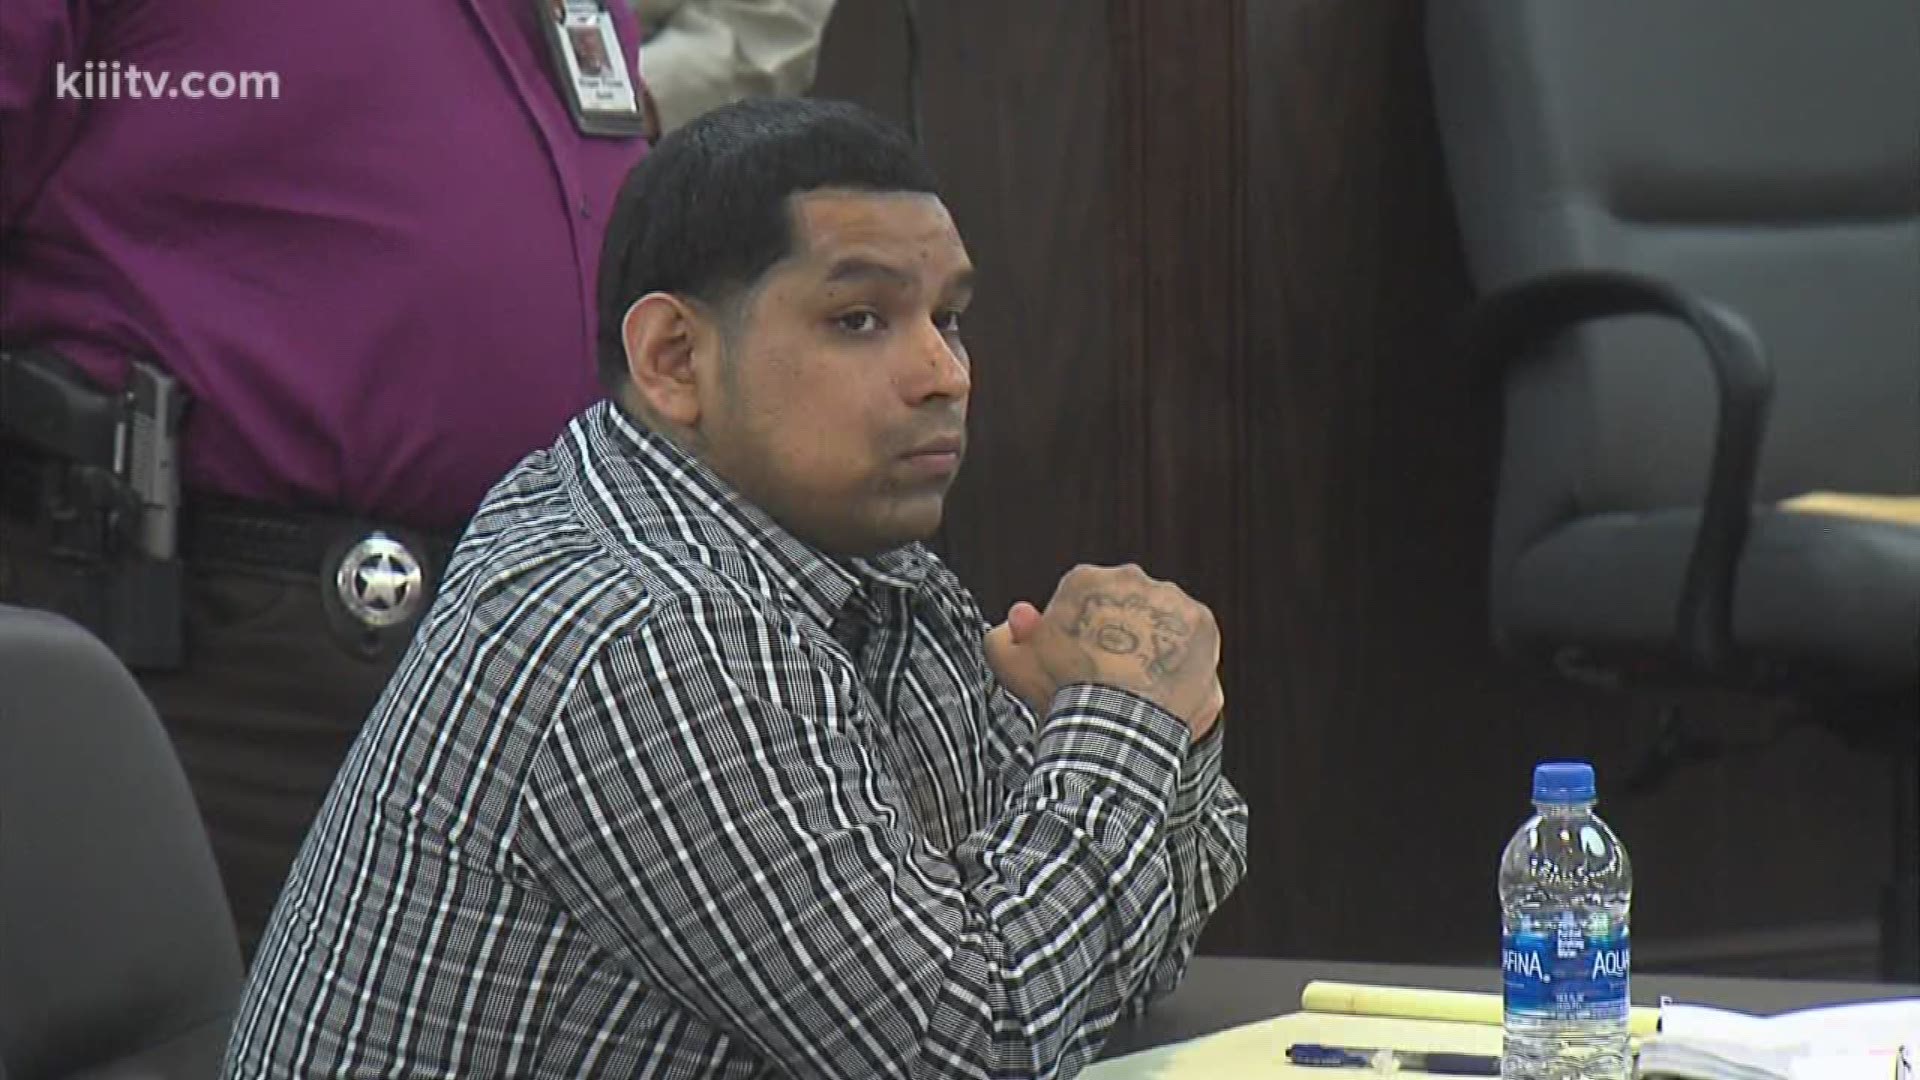 A second mistrial has been declared in the capital murder cas of David Davila, the man accused of shooting and killing 13-year-old Alex Torres back in January of 2015.